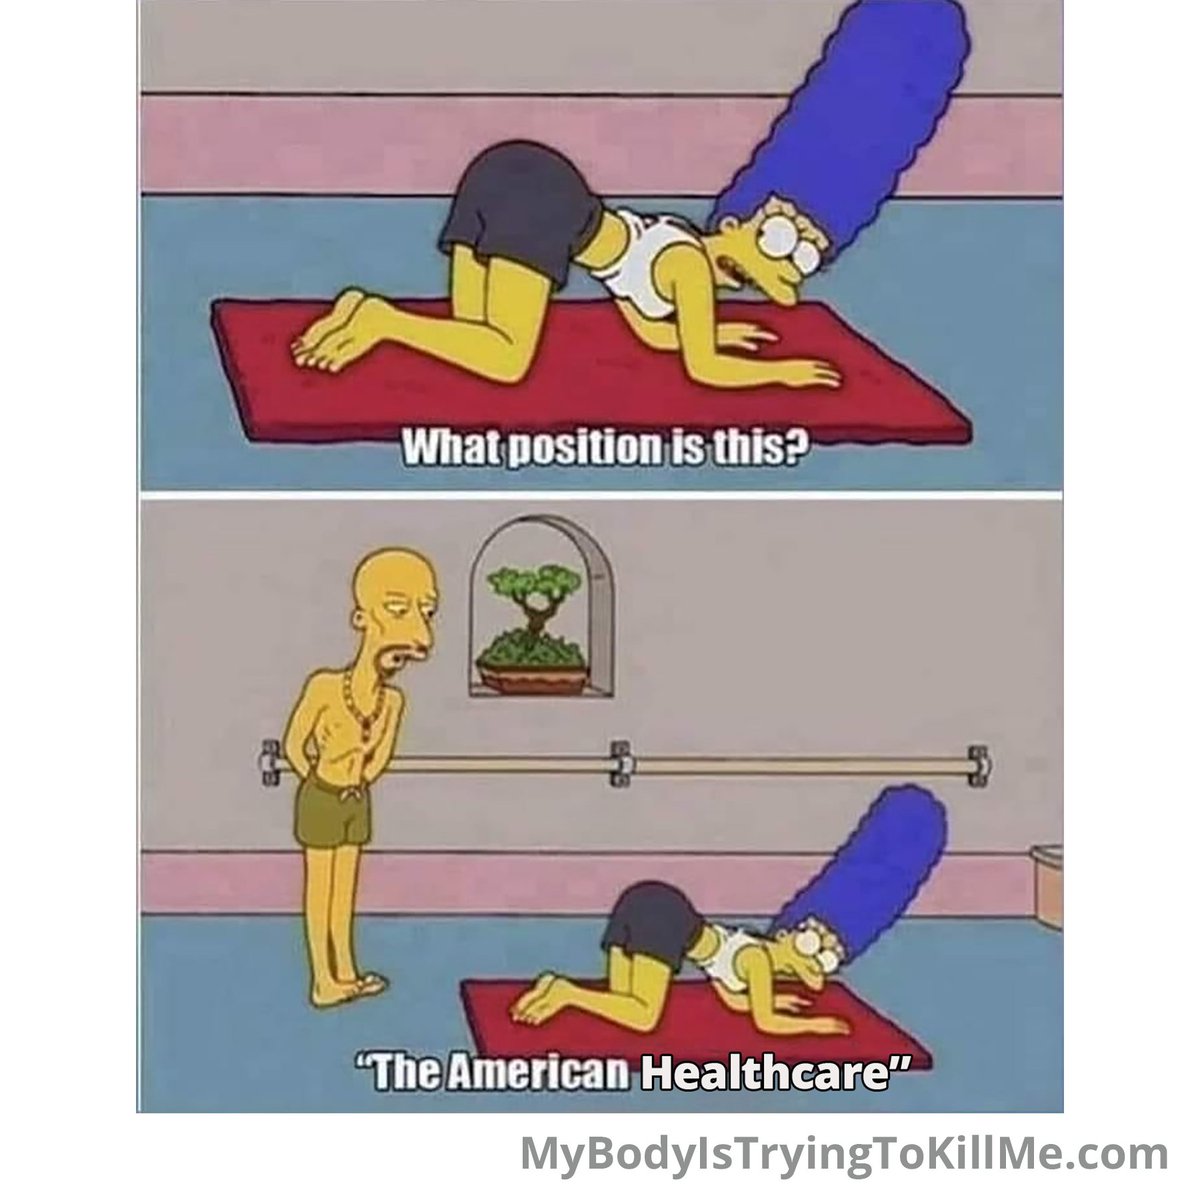 Yup, that about says it all
#americanhealthcare #ushealthcare